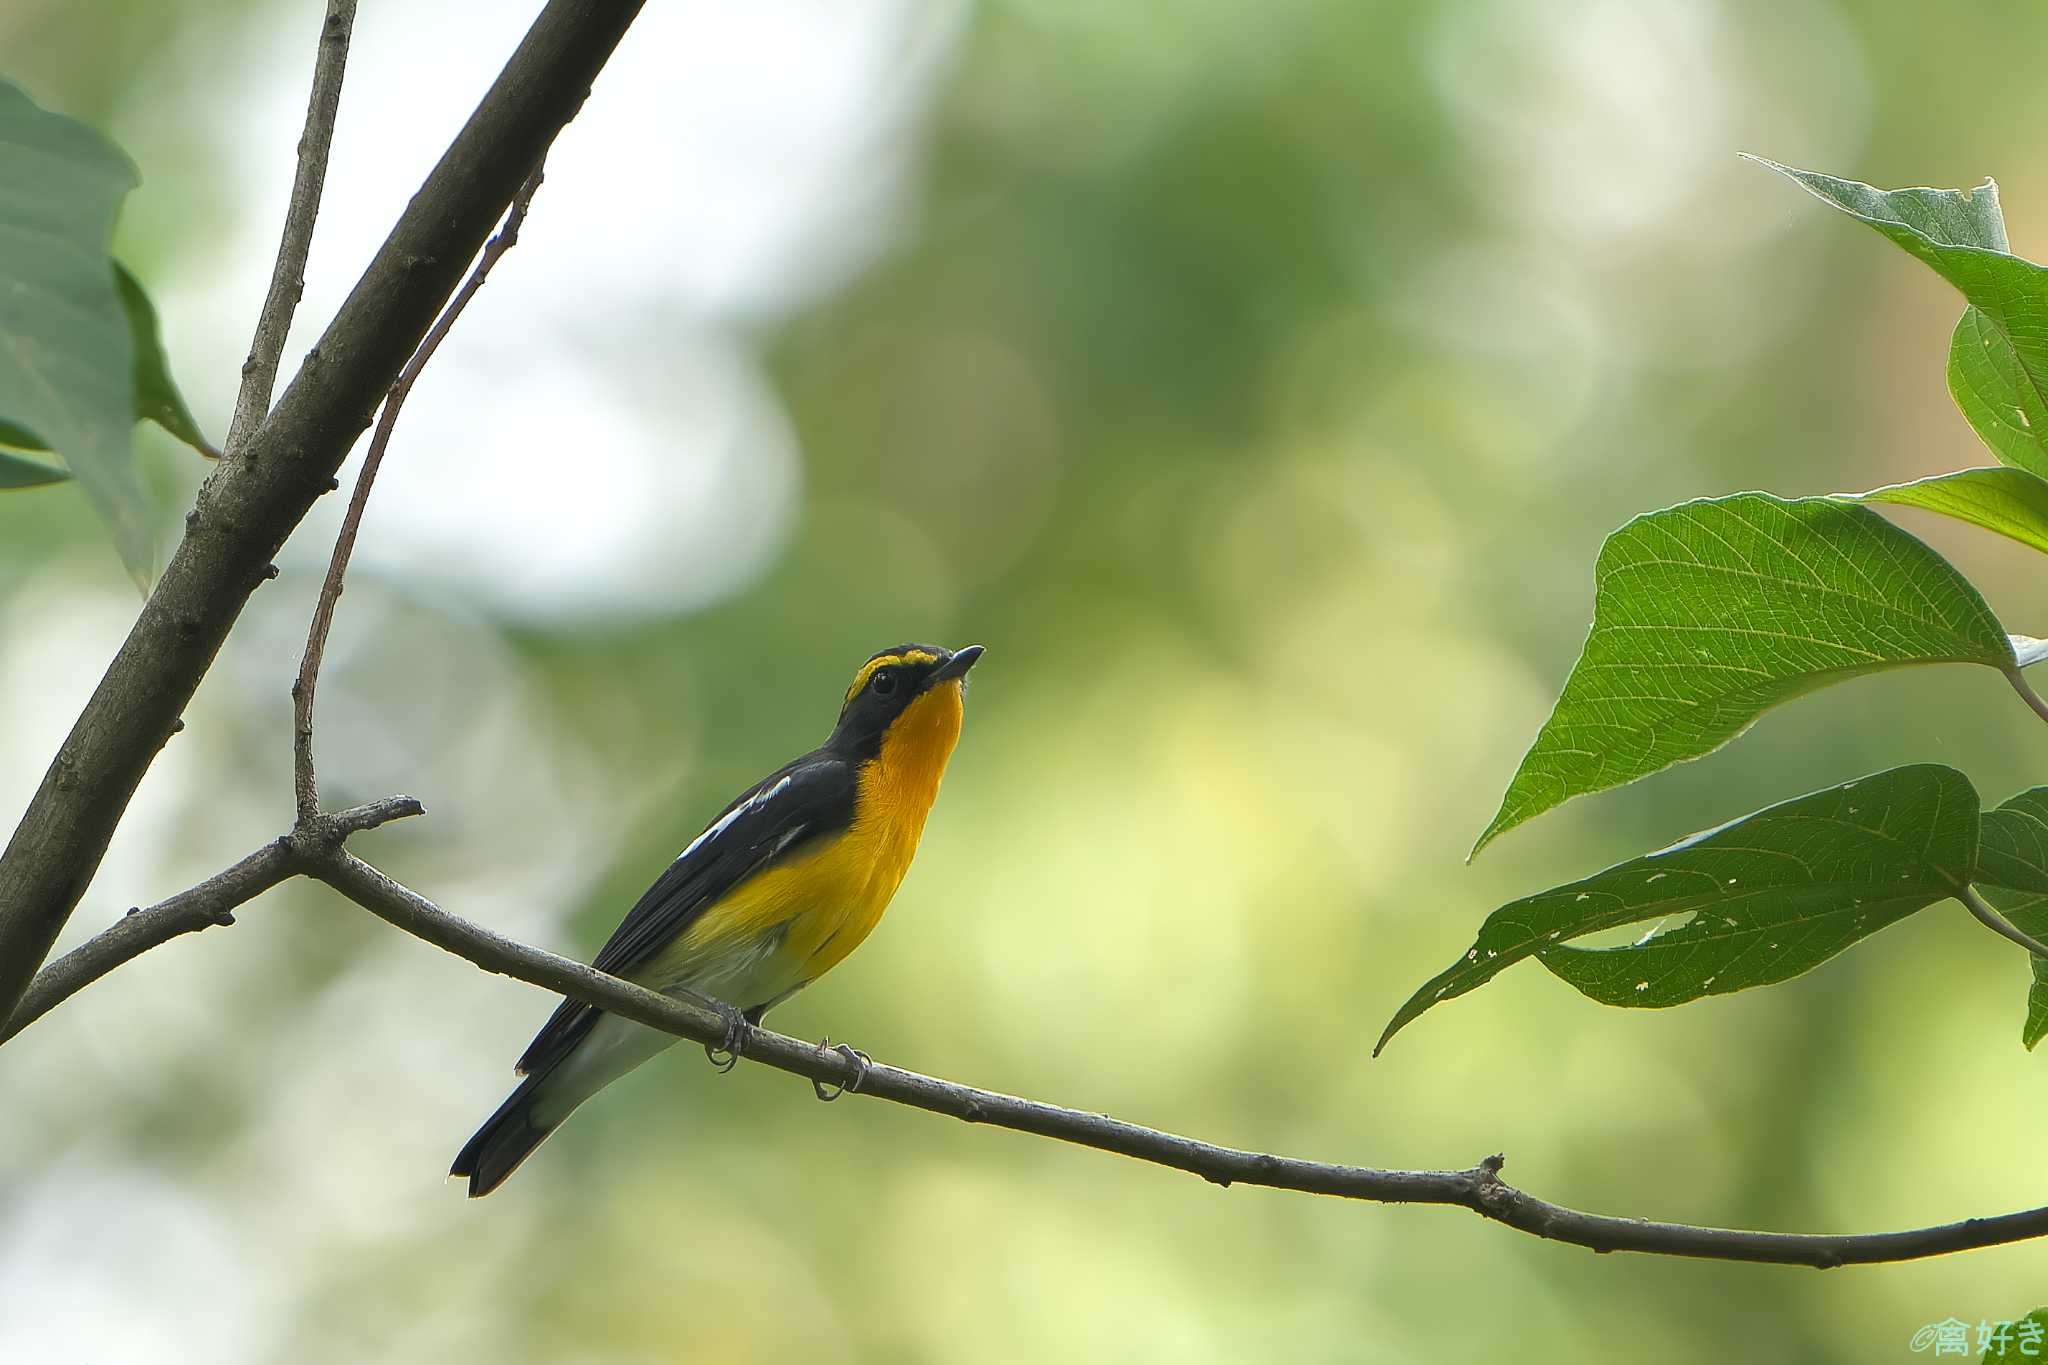 Photo of Narcissus Flycatcher at 明石市 by 禽好き